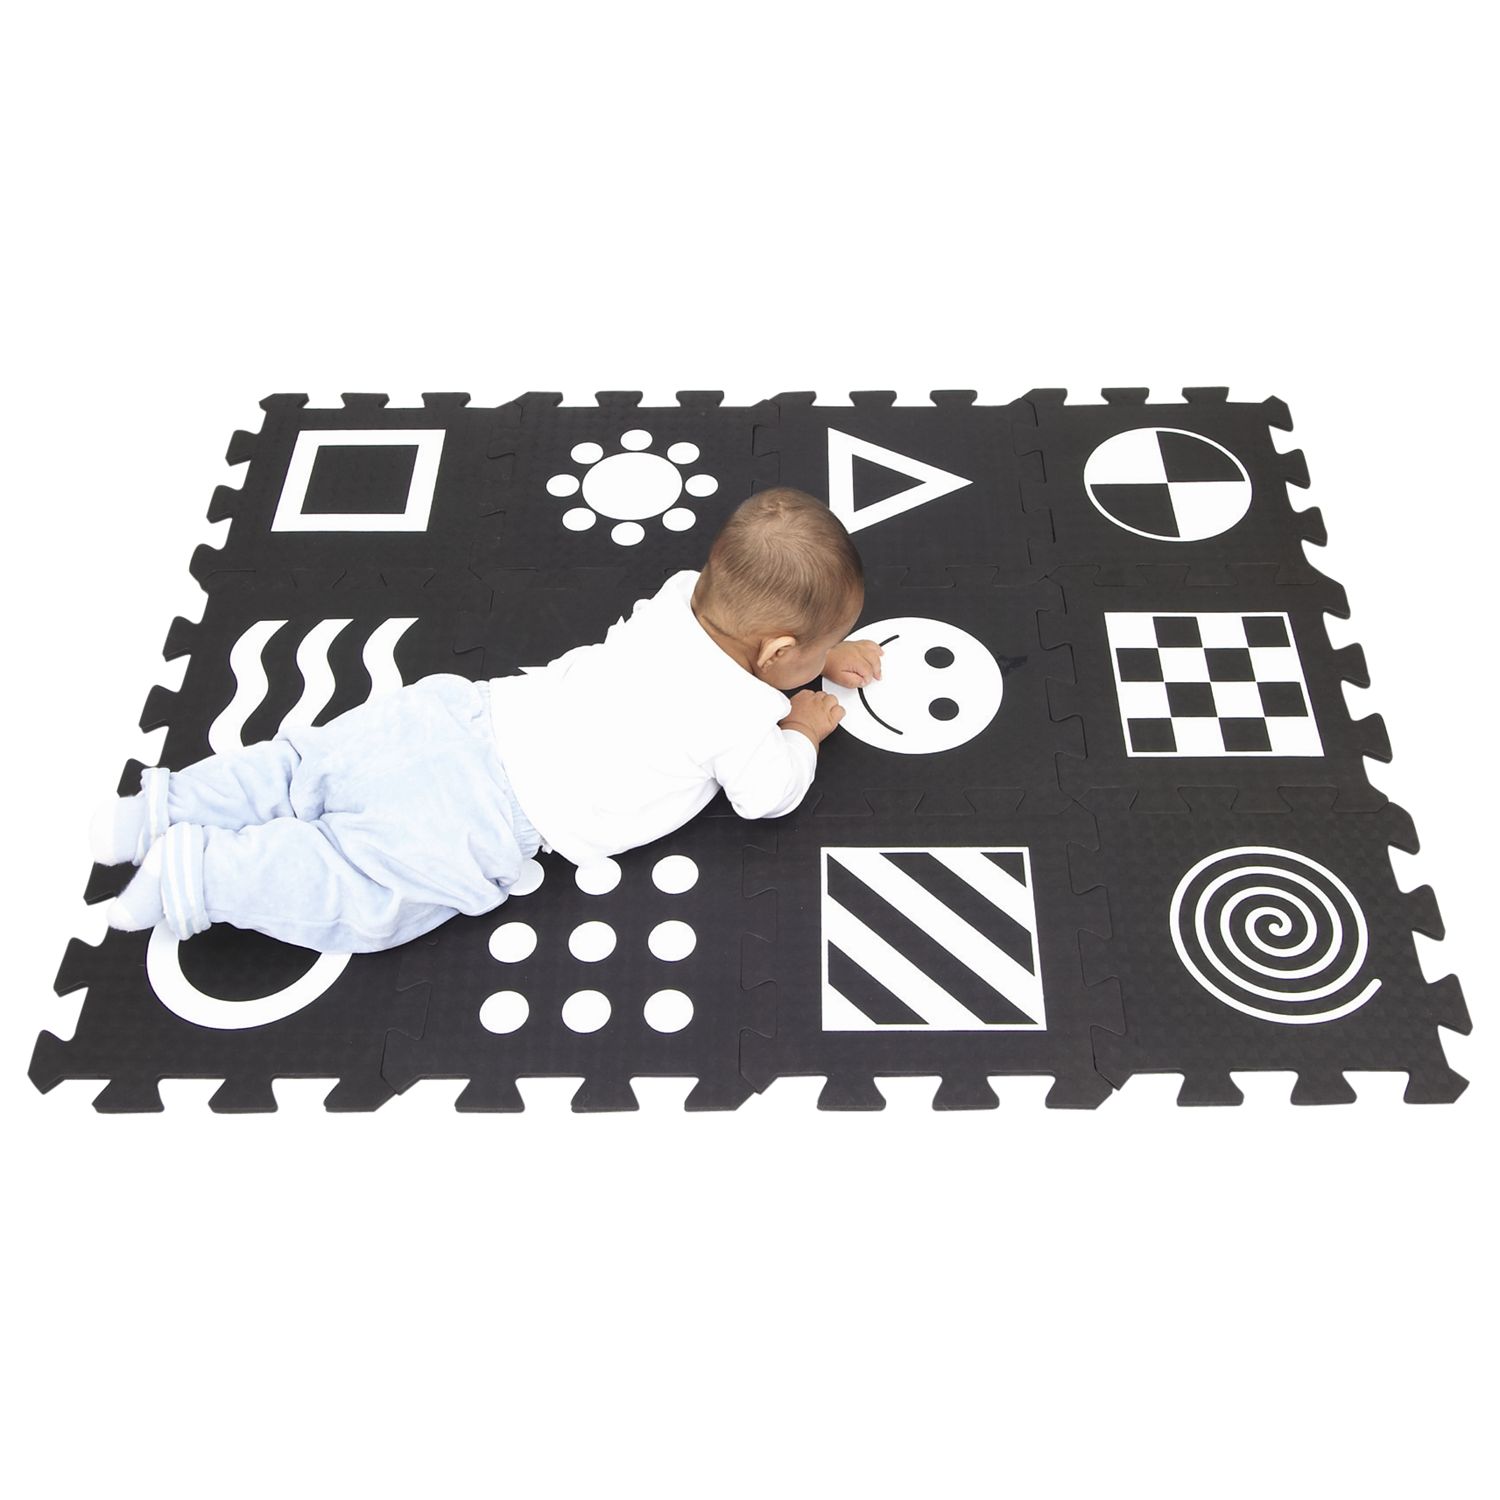 grey and white playmat